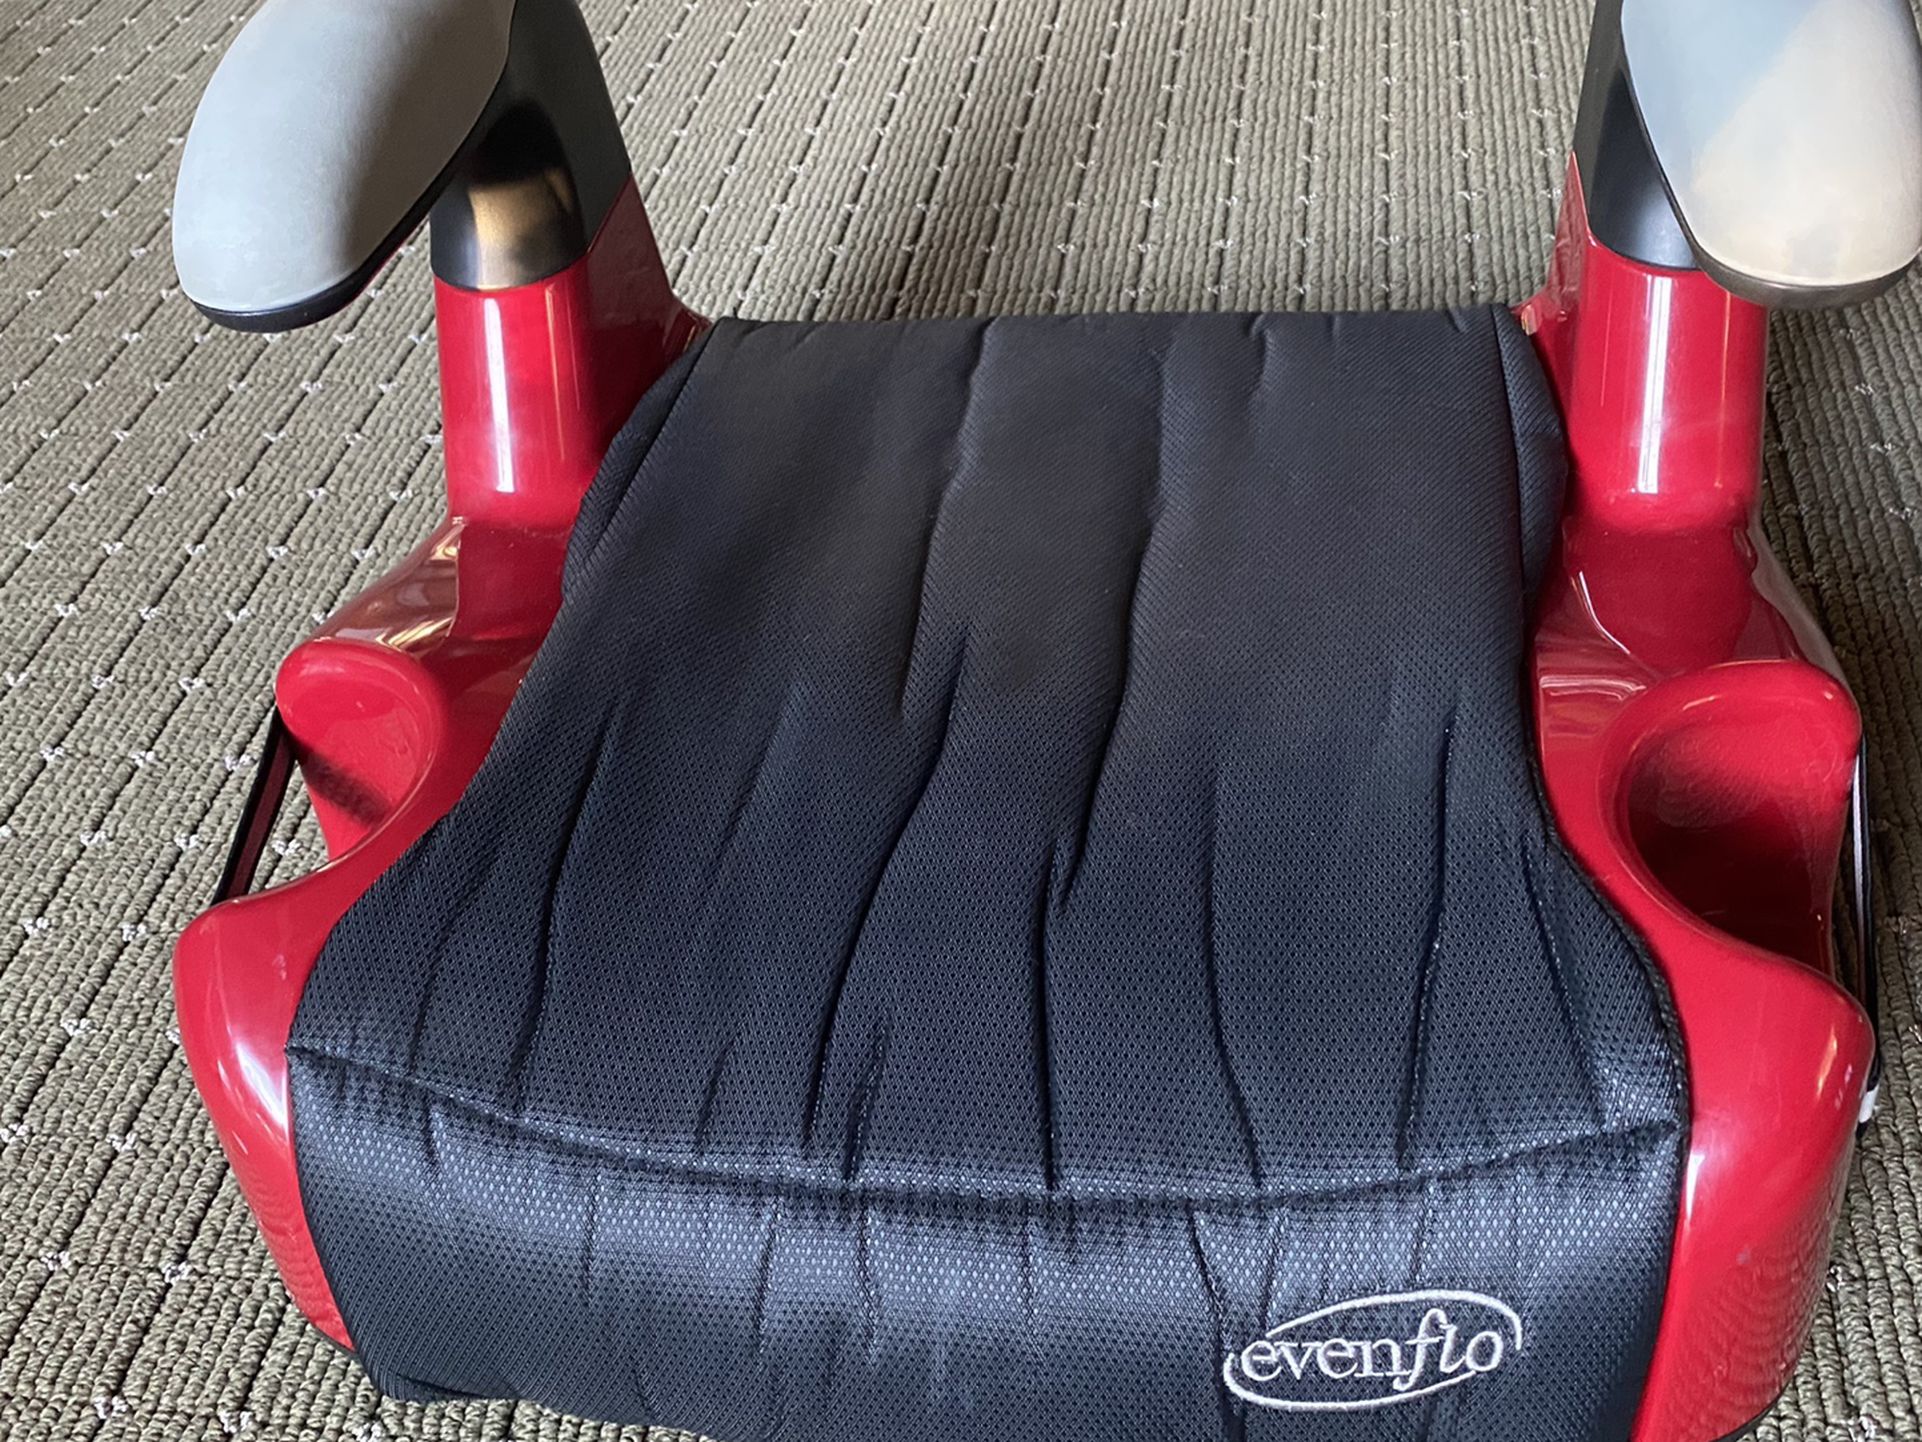 Evenflo Backless Booster Seat.